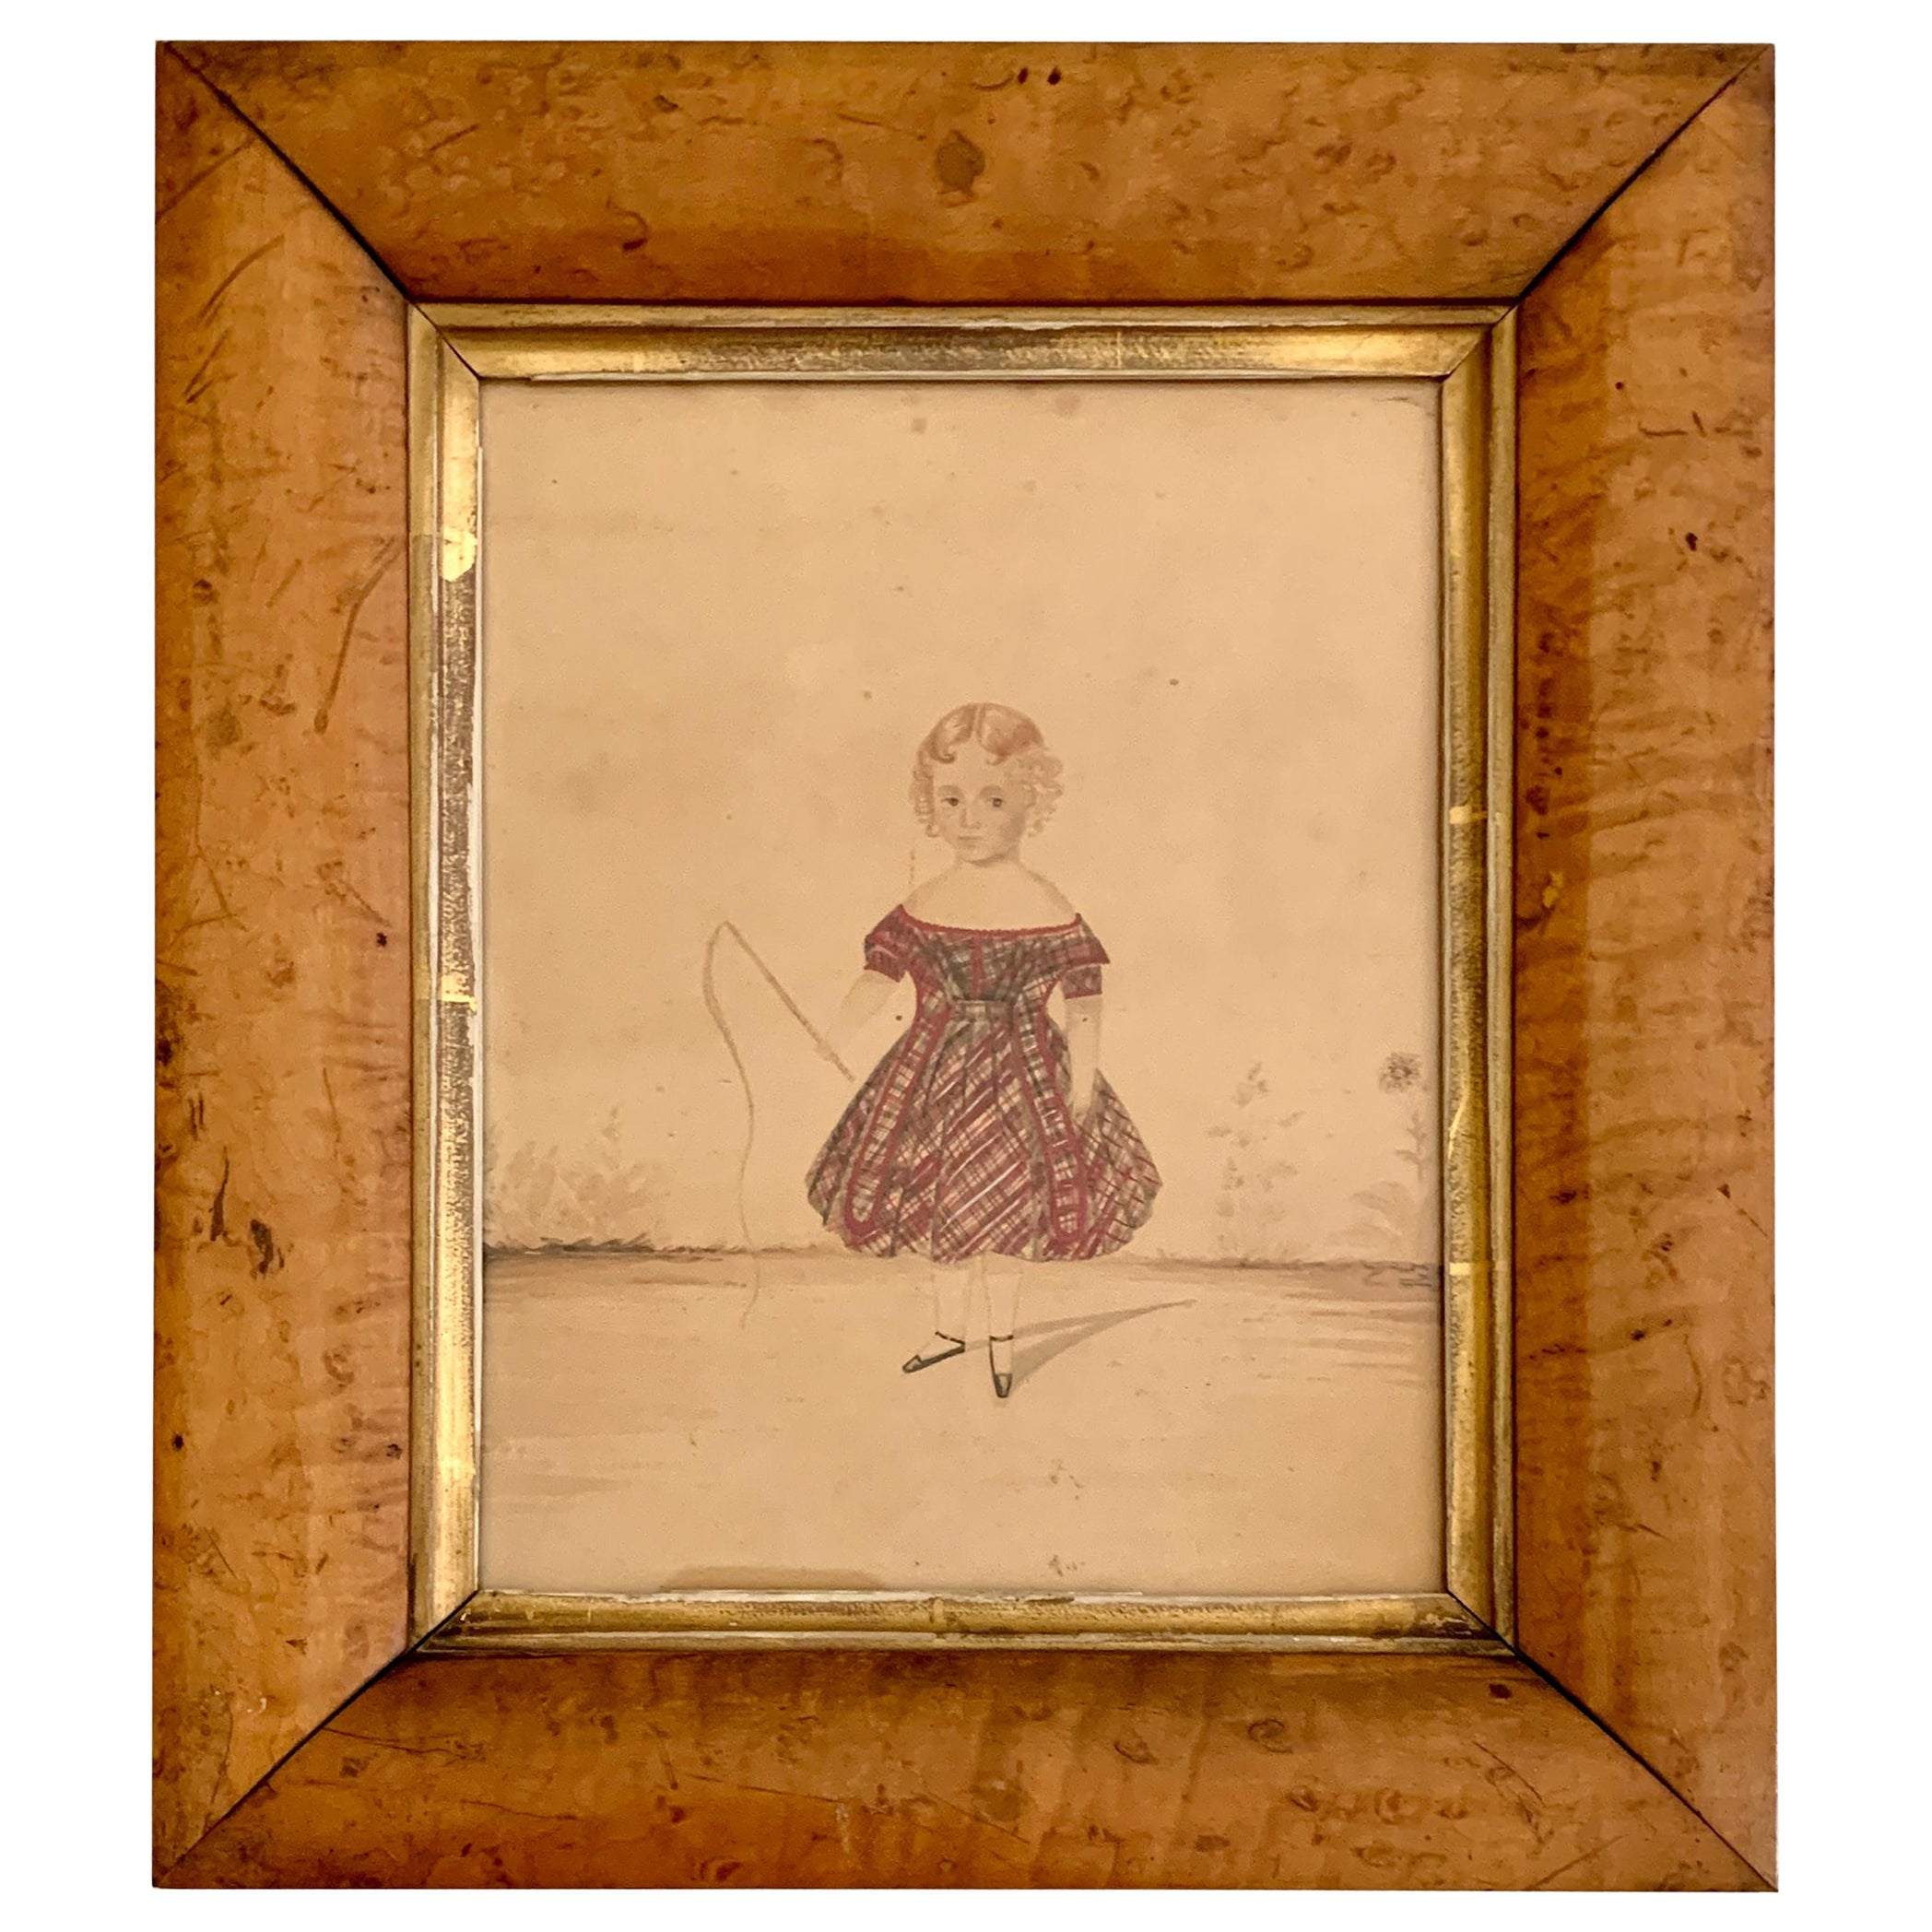 Hand Painted Watercolor Portrait of a Little Girl England Mid-19th Century